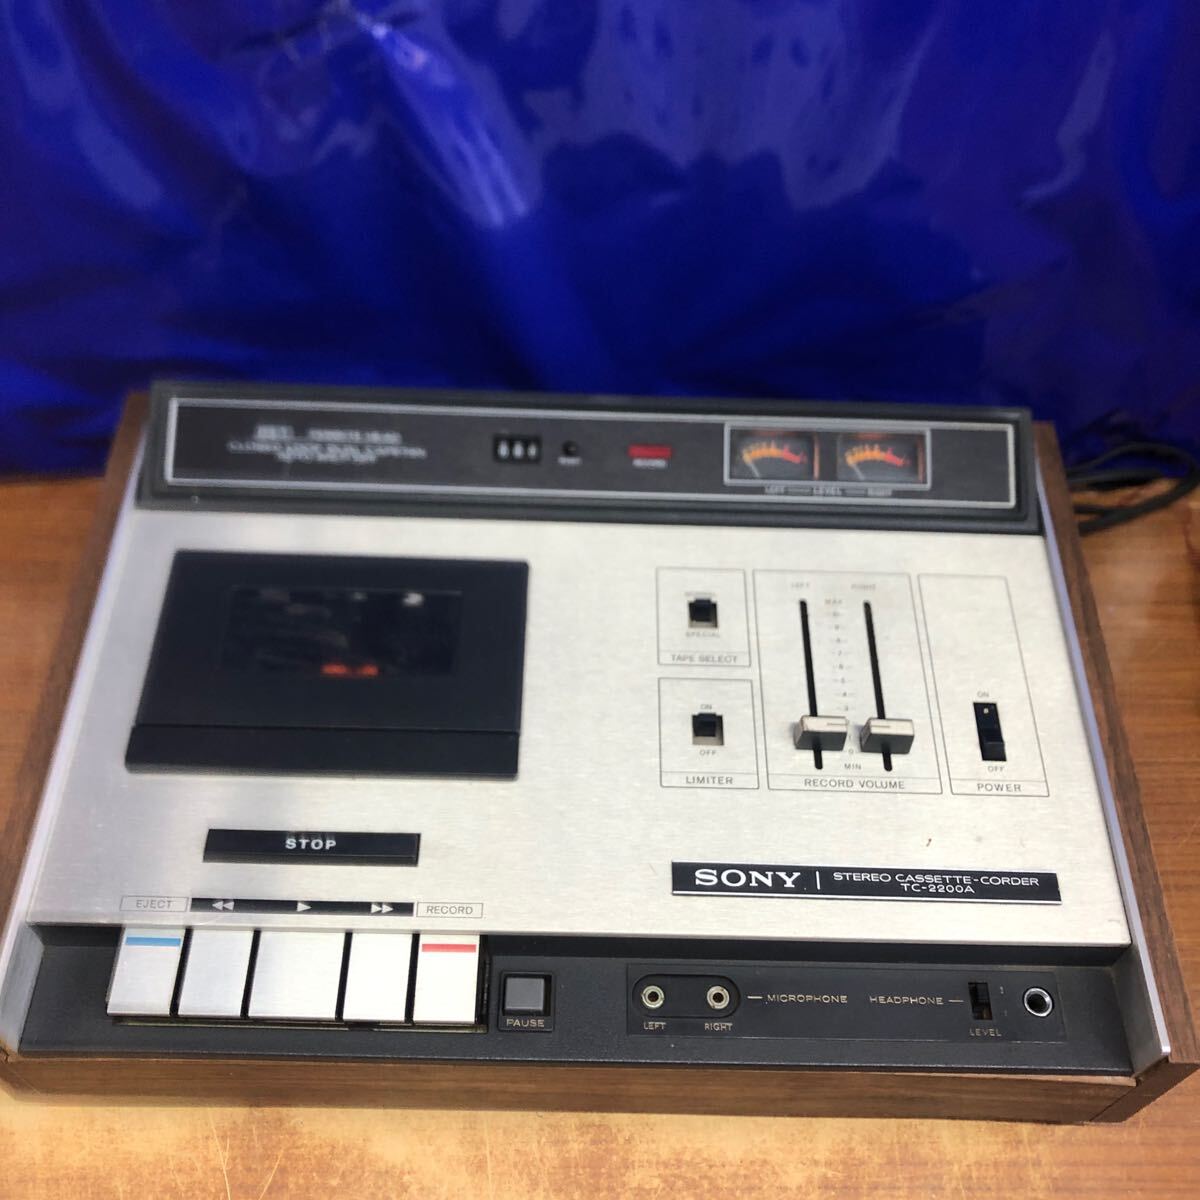 SONY STEREO CASSETTE-CORDER TC-2200A 昭和レトロ の画像1